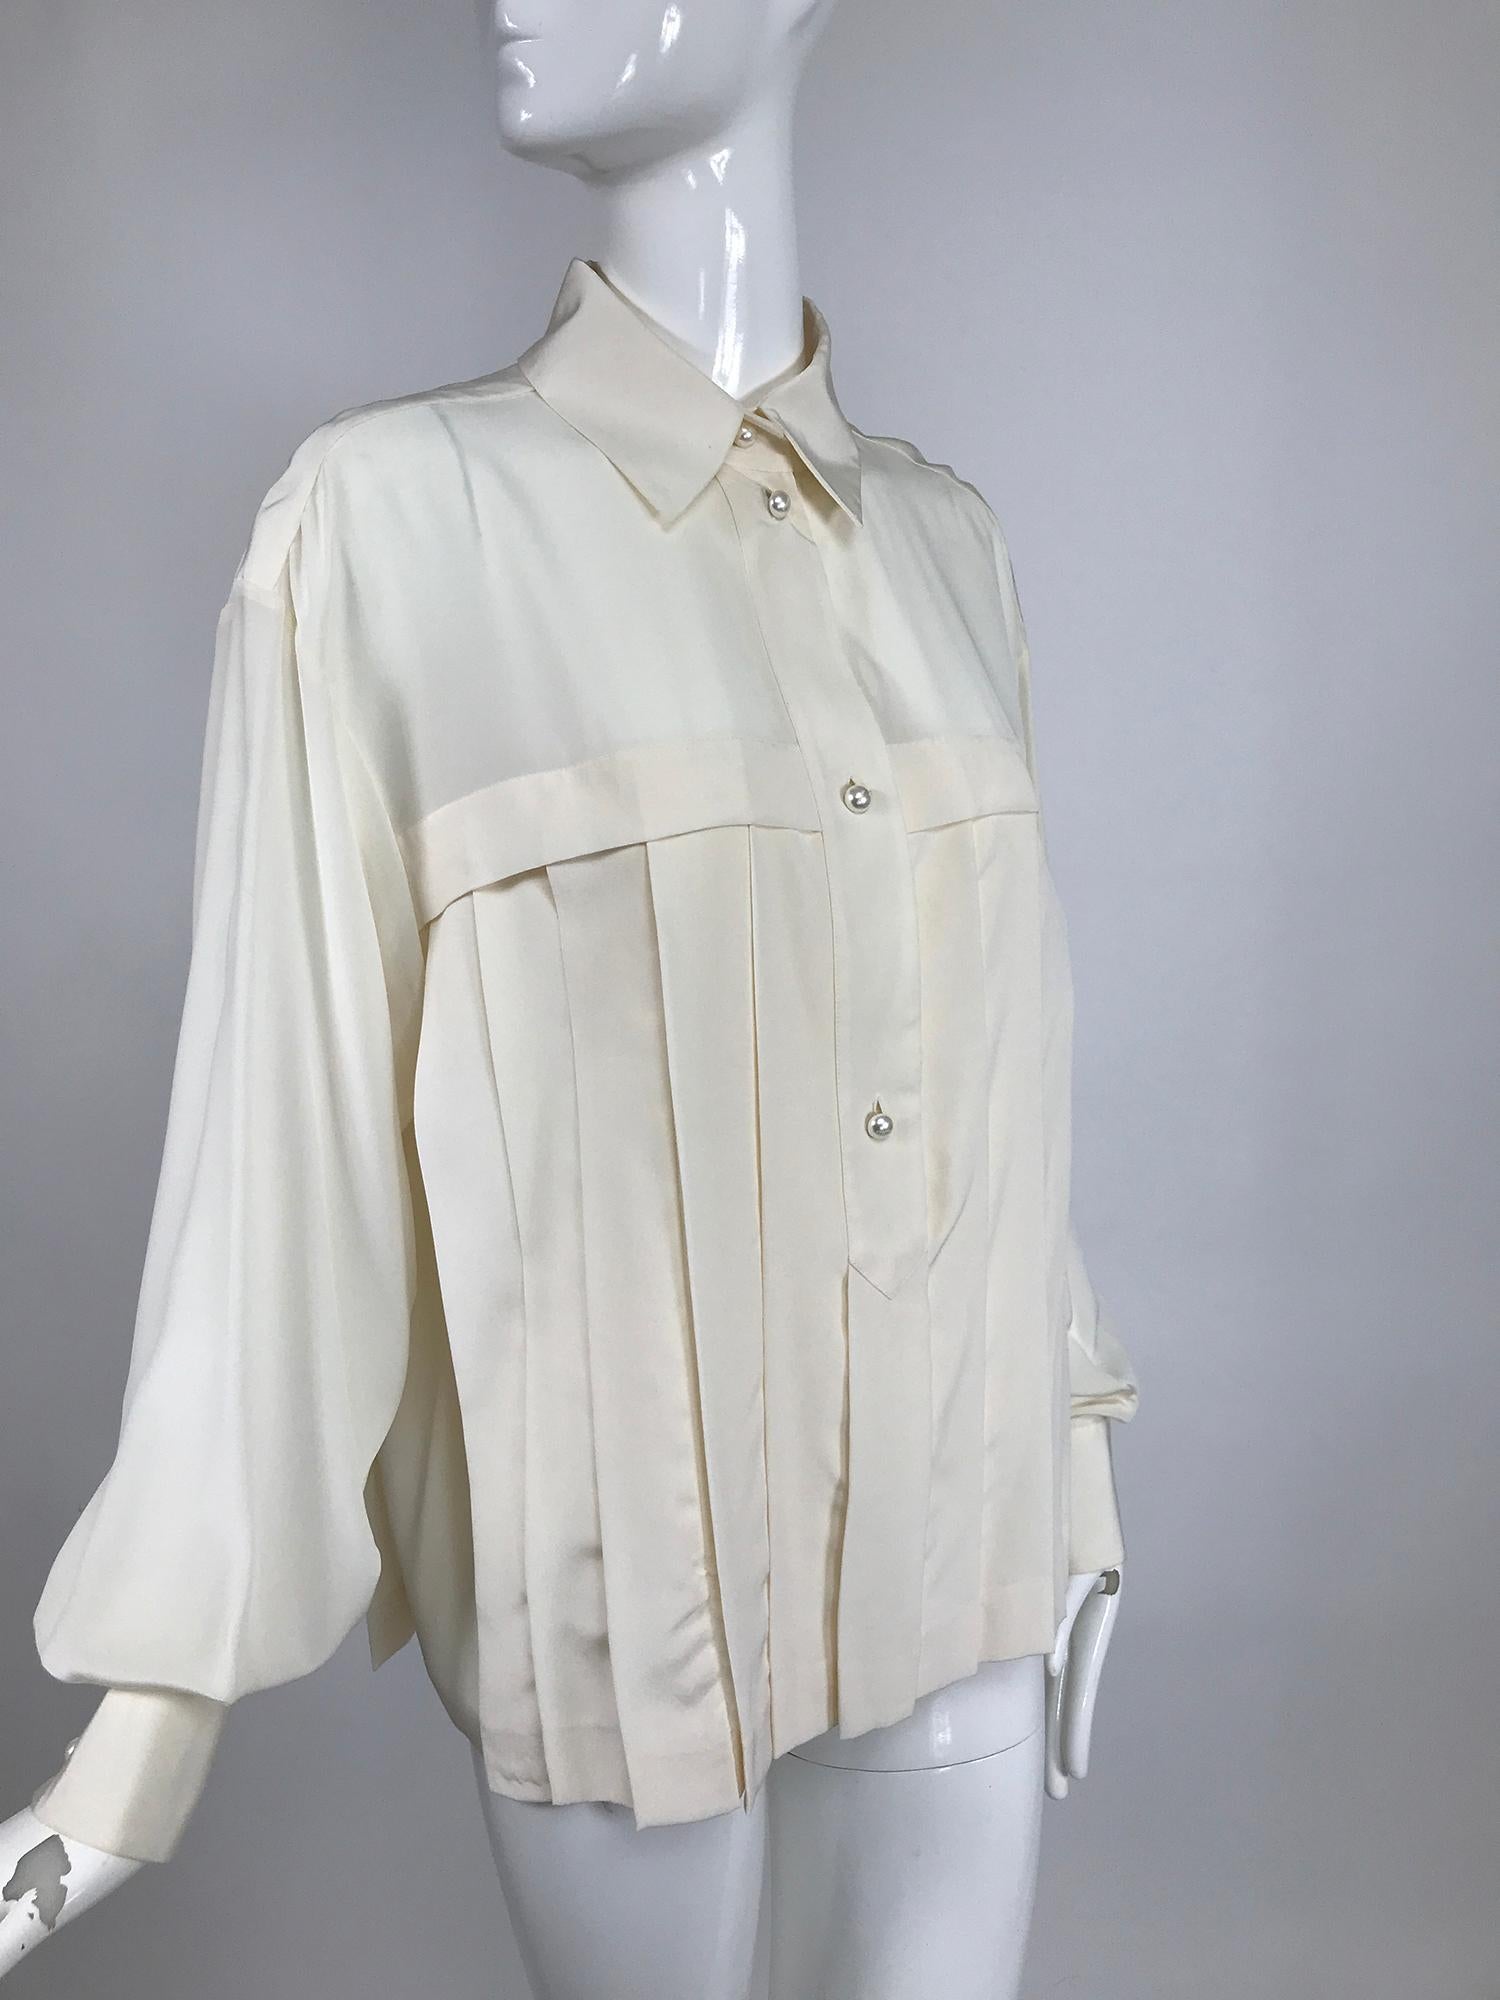 Chanel off white silk pleated long sleeve blouse, with amazing pearl logo buttons.Pull on blouse has a placket front with wing collar, vertical pleats beneath the yoke at the front and back. Long sleeves are full, with button cuffs. Marked size 40.